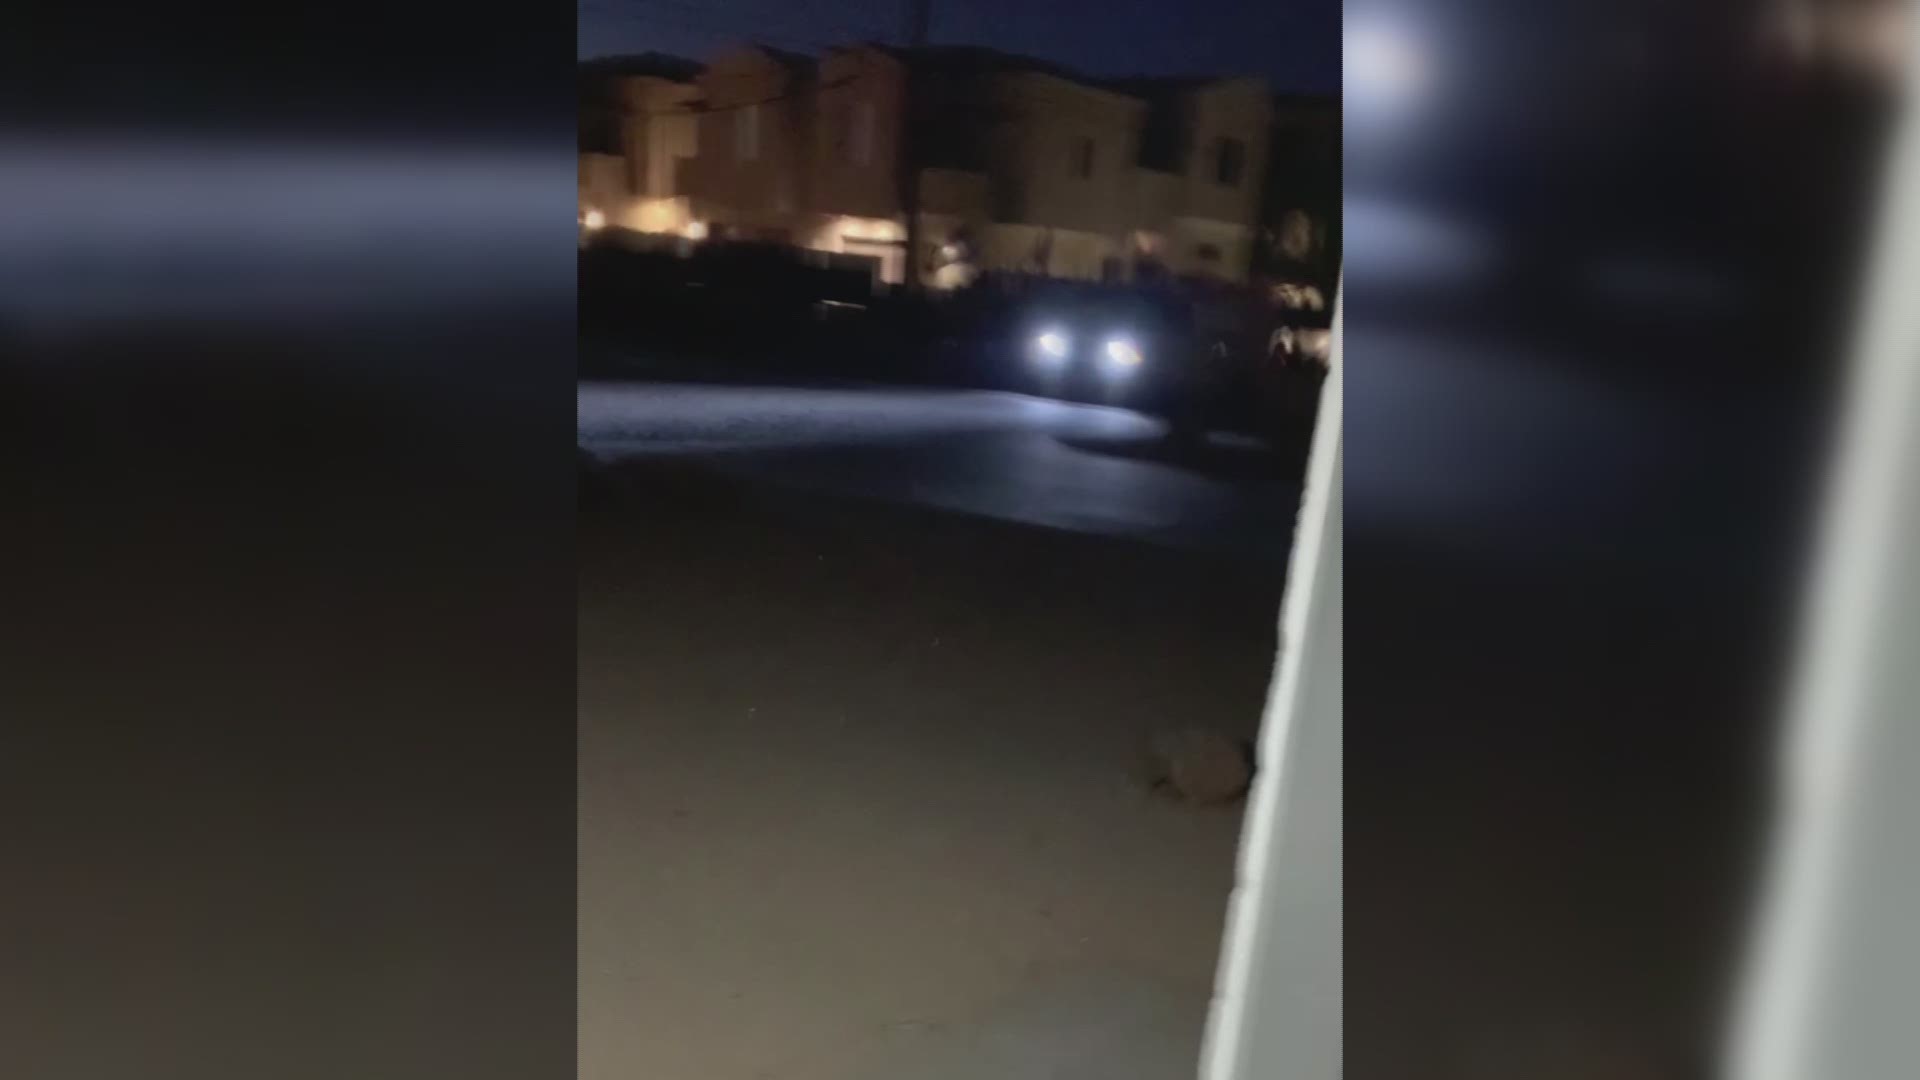 Video obtained by 12 News shows a group outside of Arizona Secretary of State Katie Hobbs' home chanting "we are watching you."